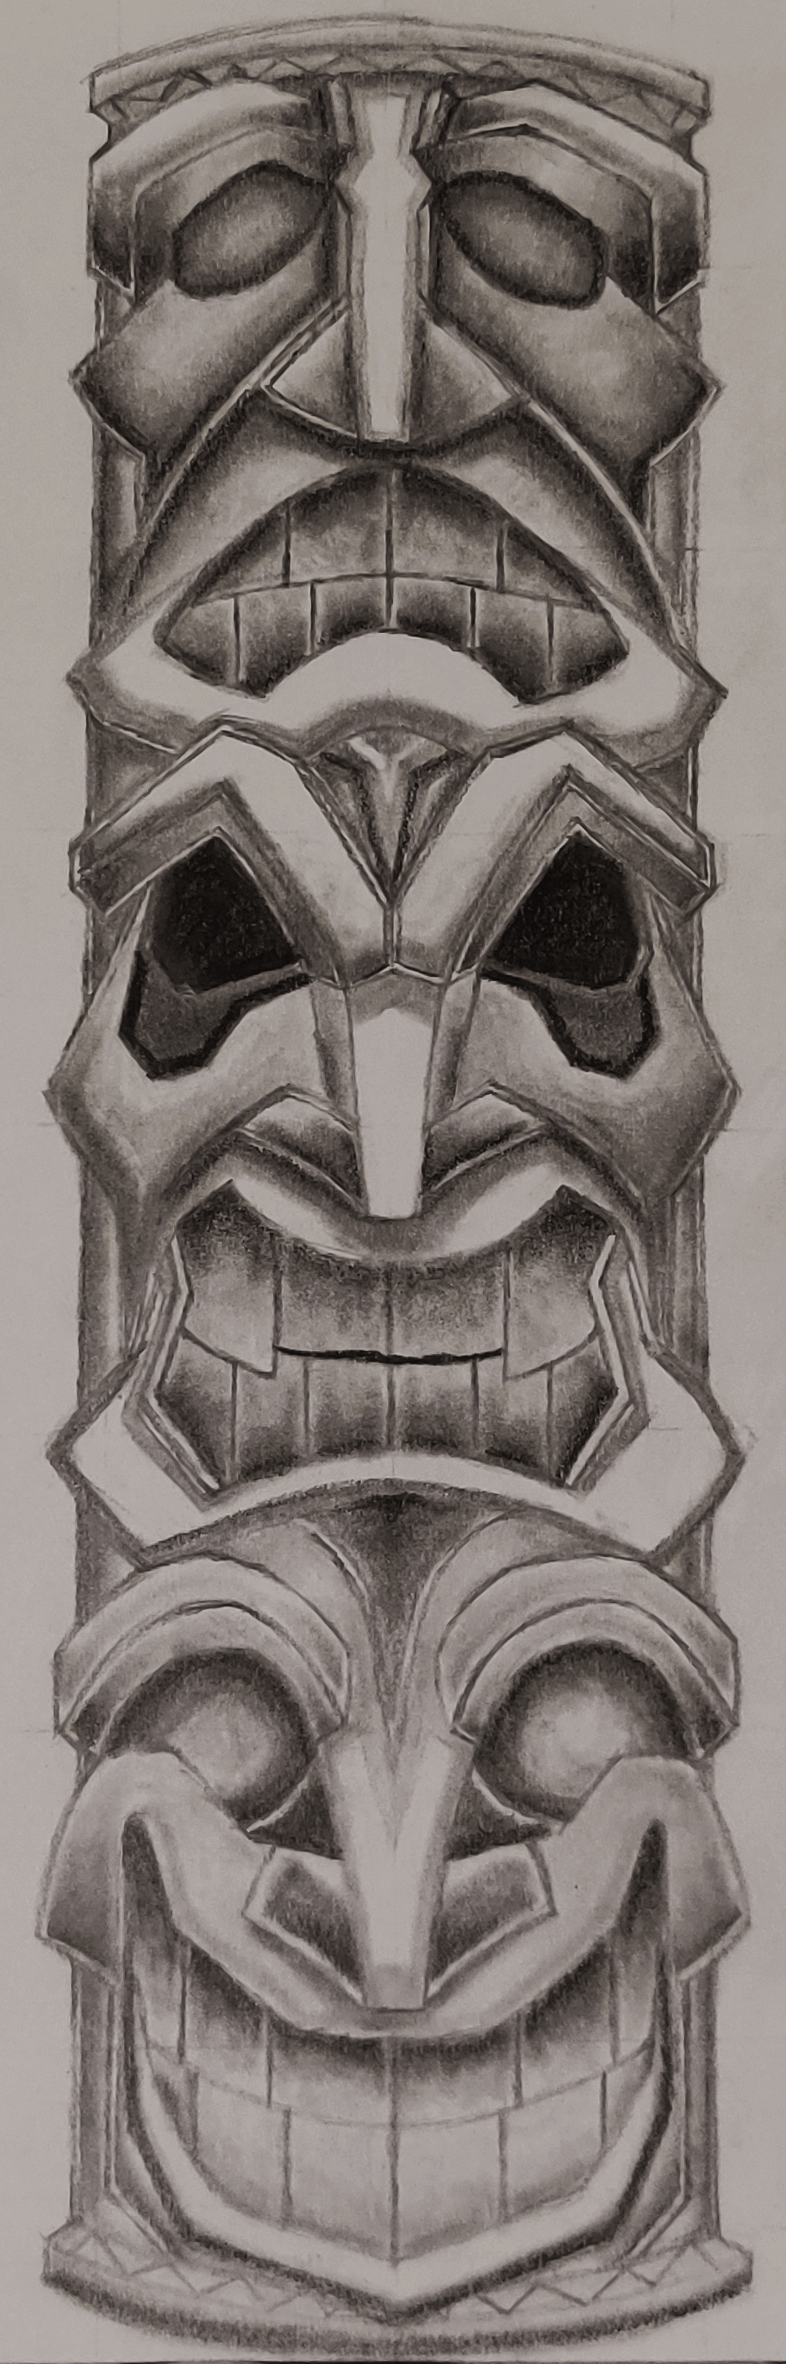 A drawing of a totem pole in pencil.